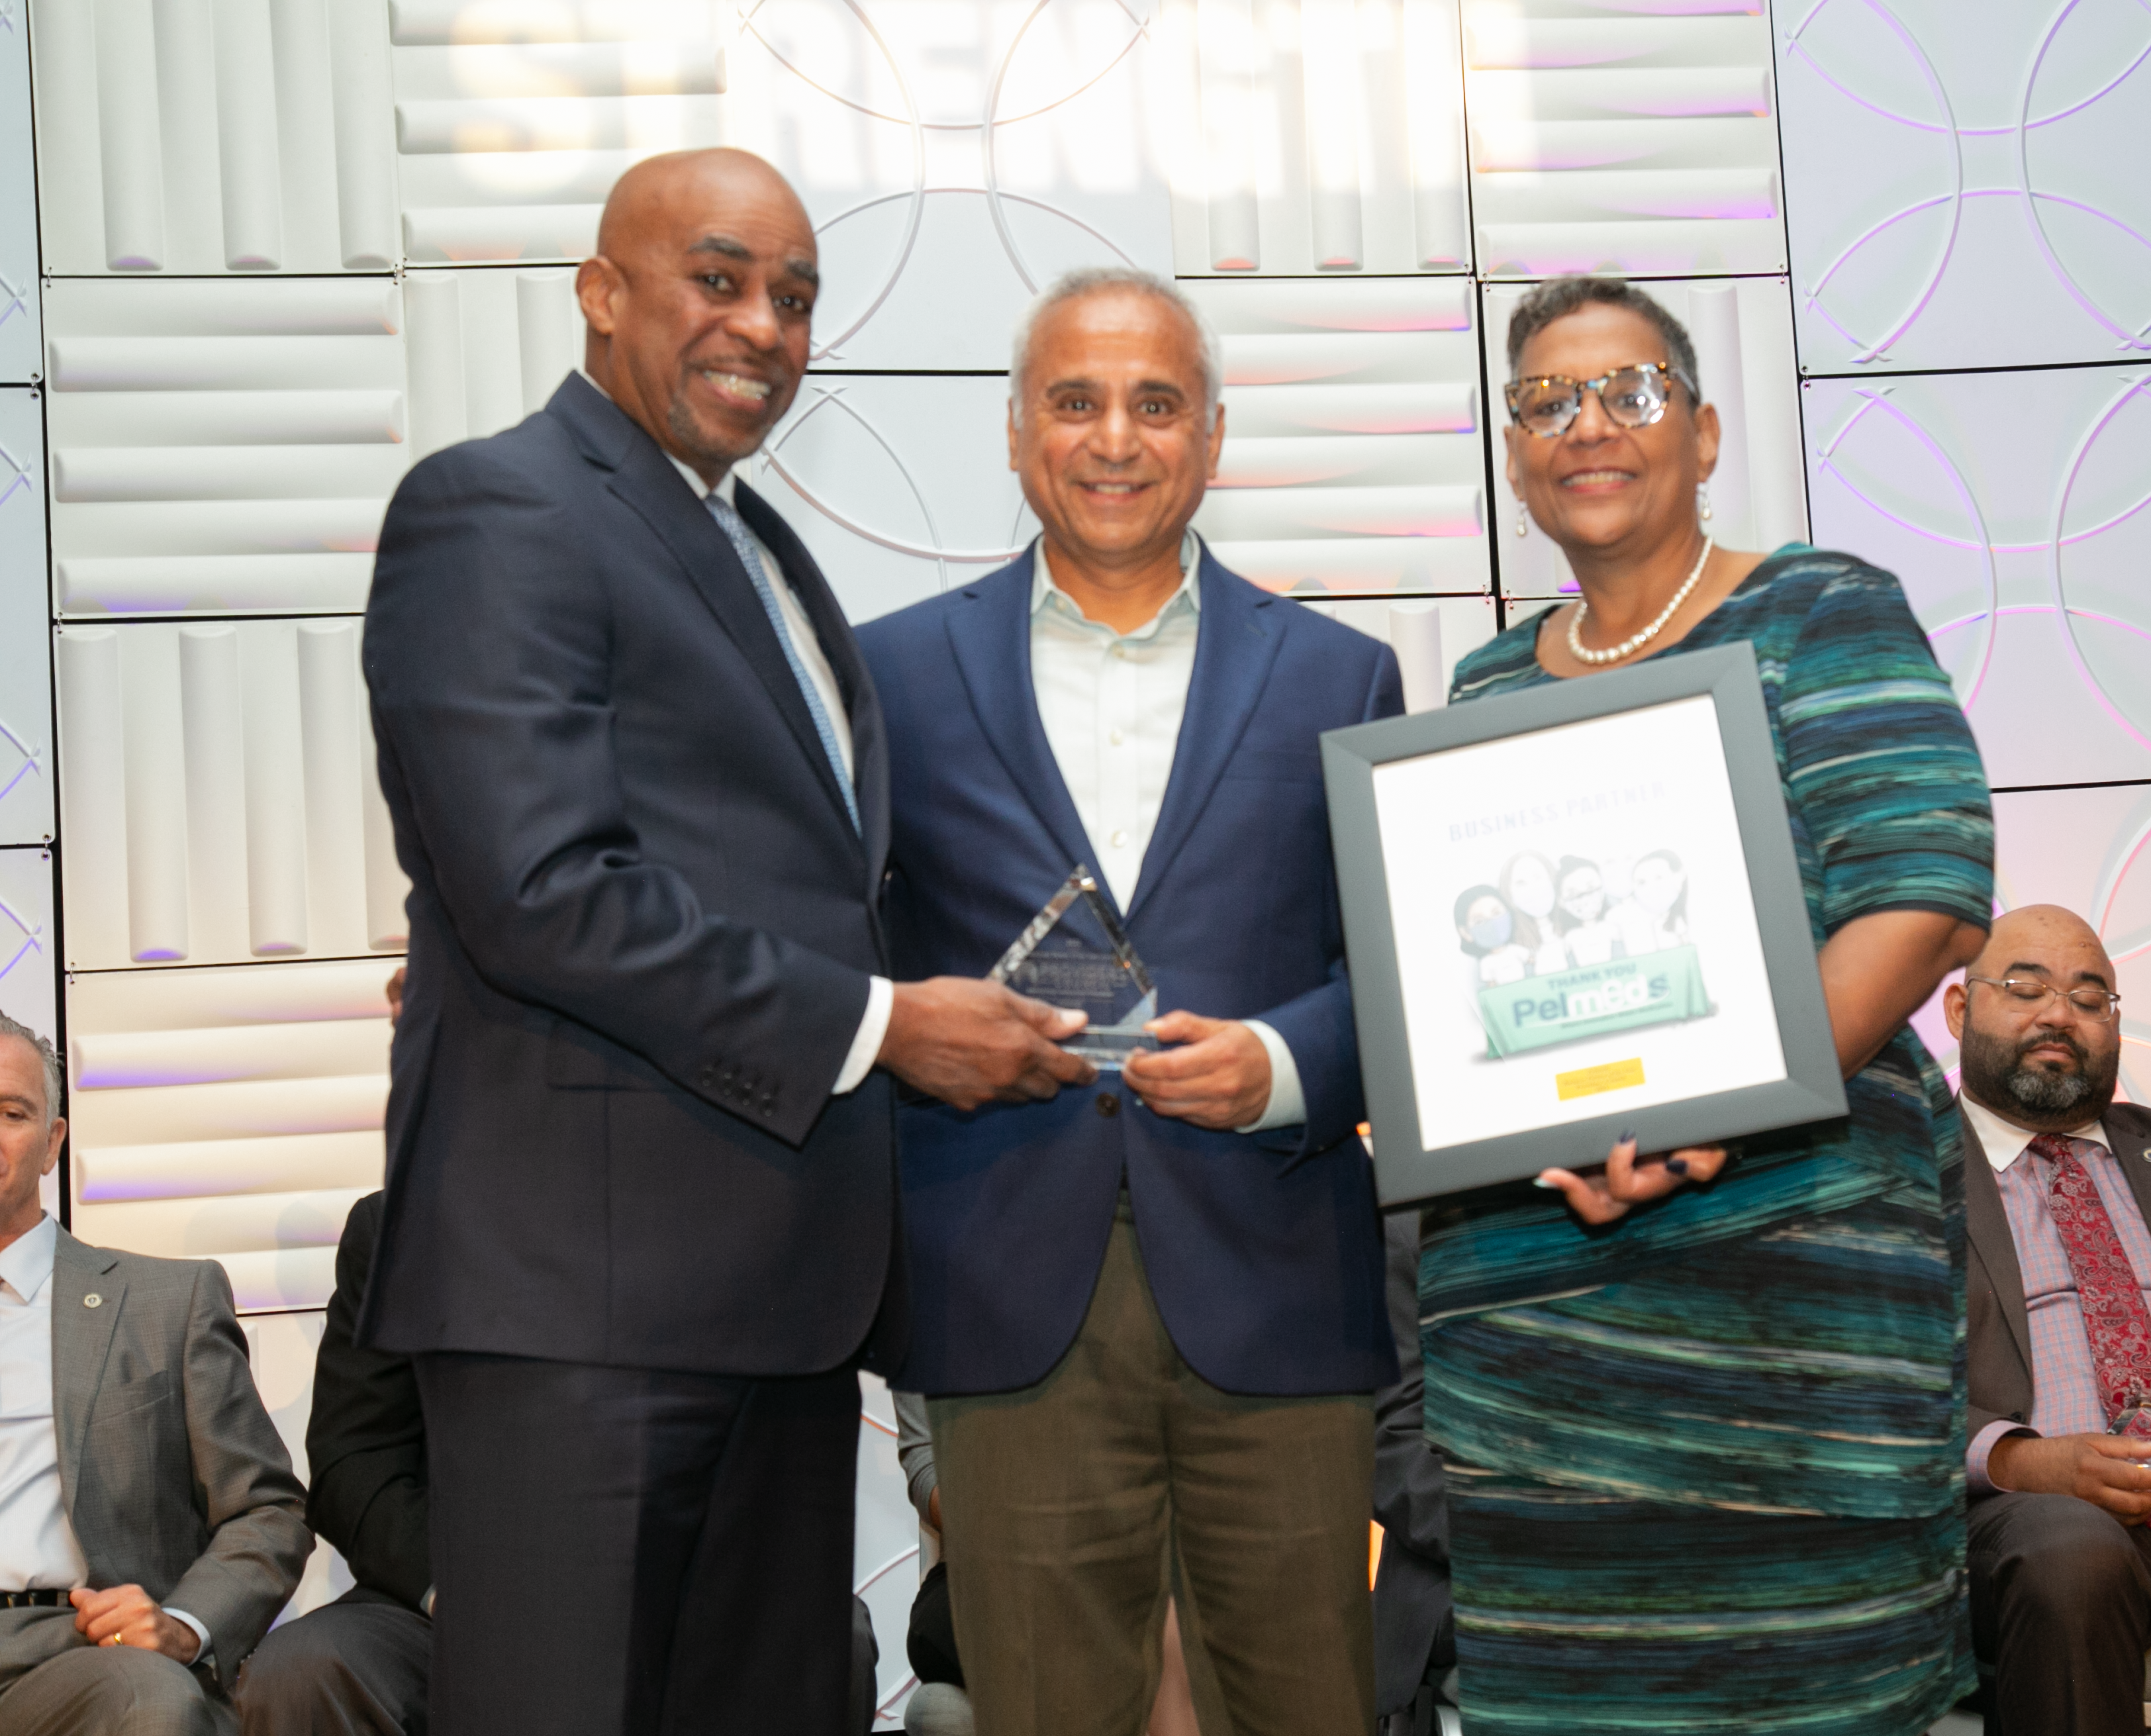 Bhuren Patel, CEO of Pelmeds, received an award from the Providers' Council last month